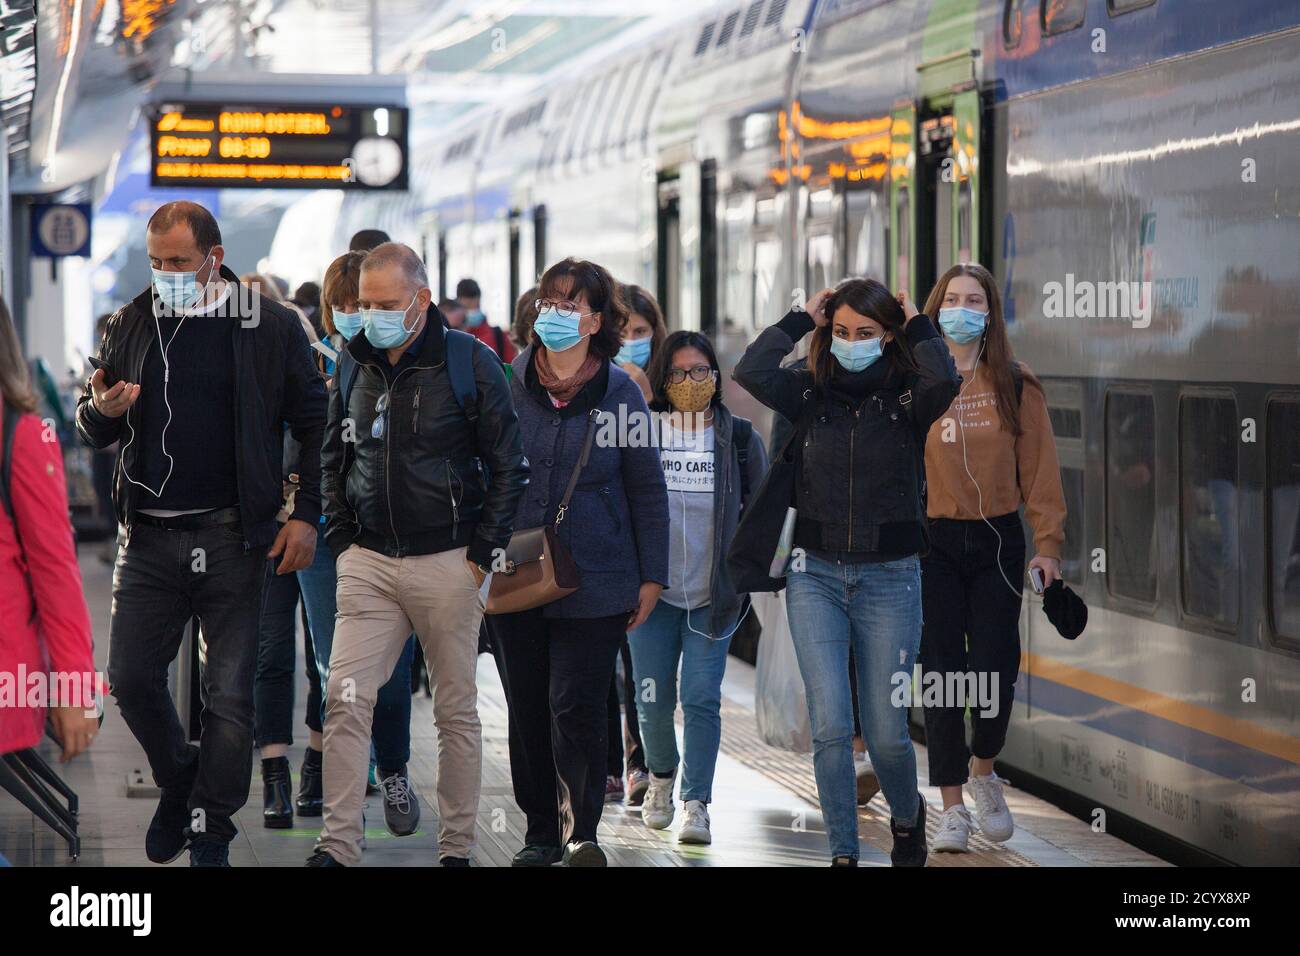 ROME, ITALY - OCTOBER 01 2020: Pedestrians, wearing protective face masks, disembark from a train in Rome, Italy. Stock Photo